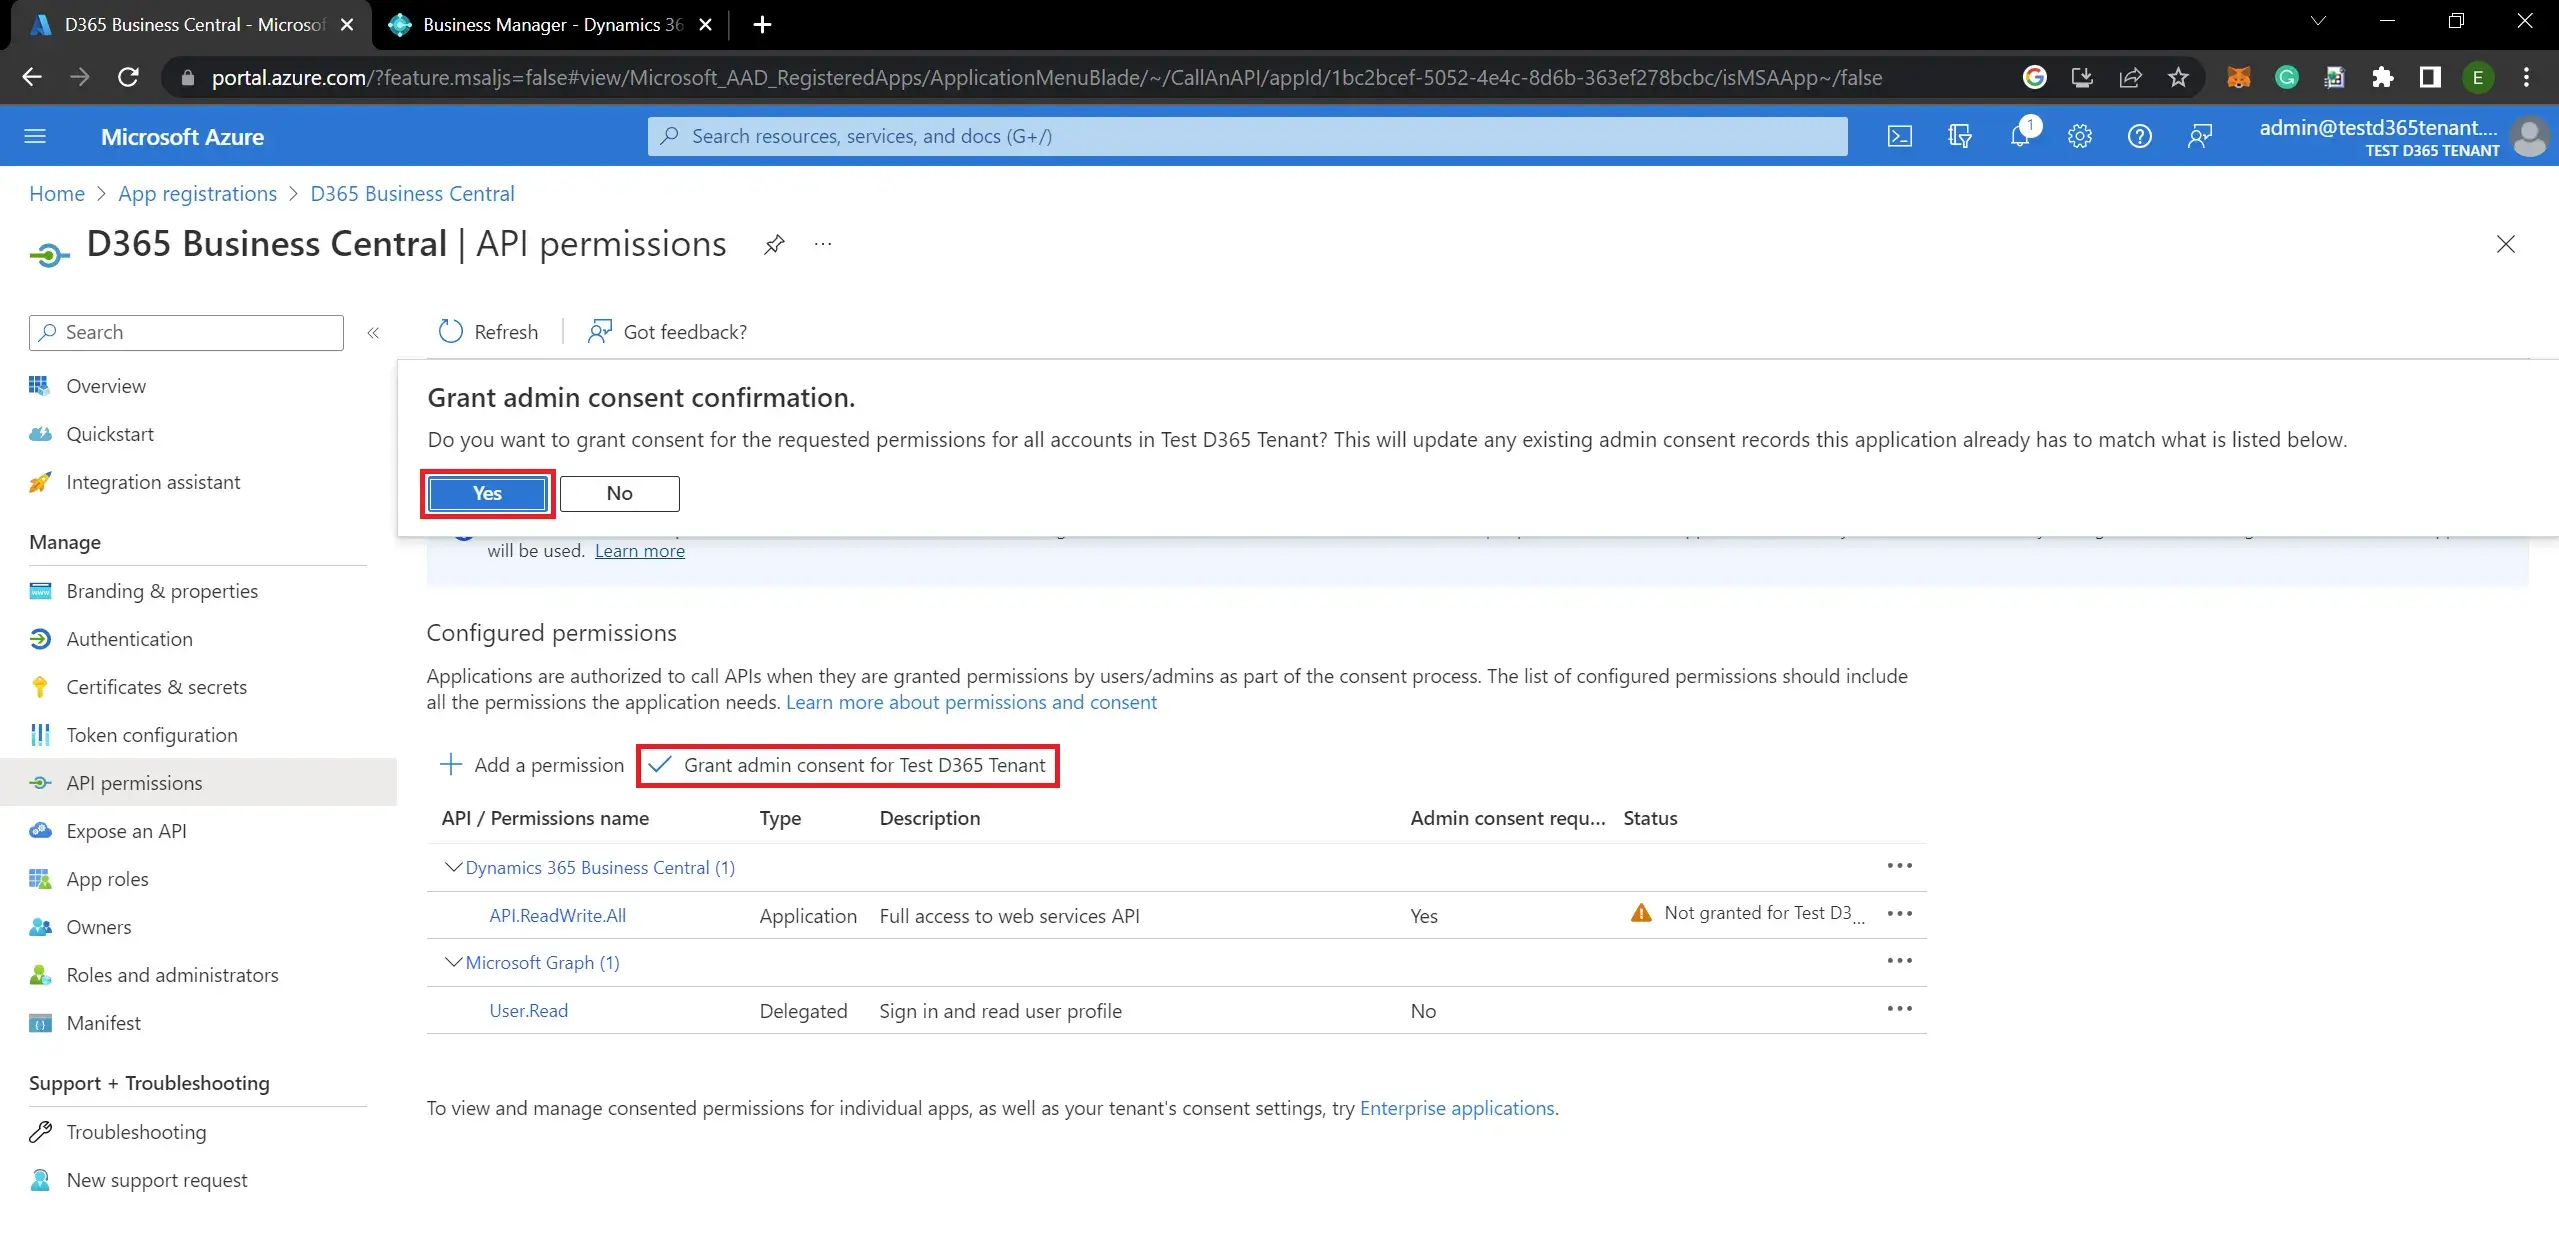 How to Grant Admin Consent of Business Central App Registration on Azure